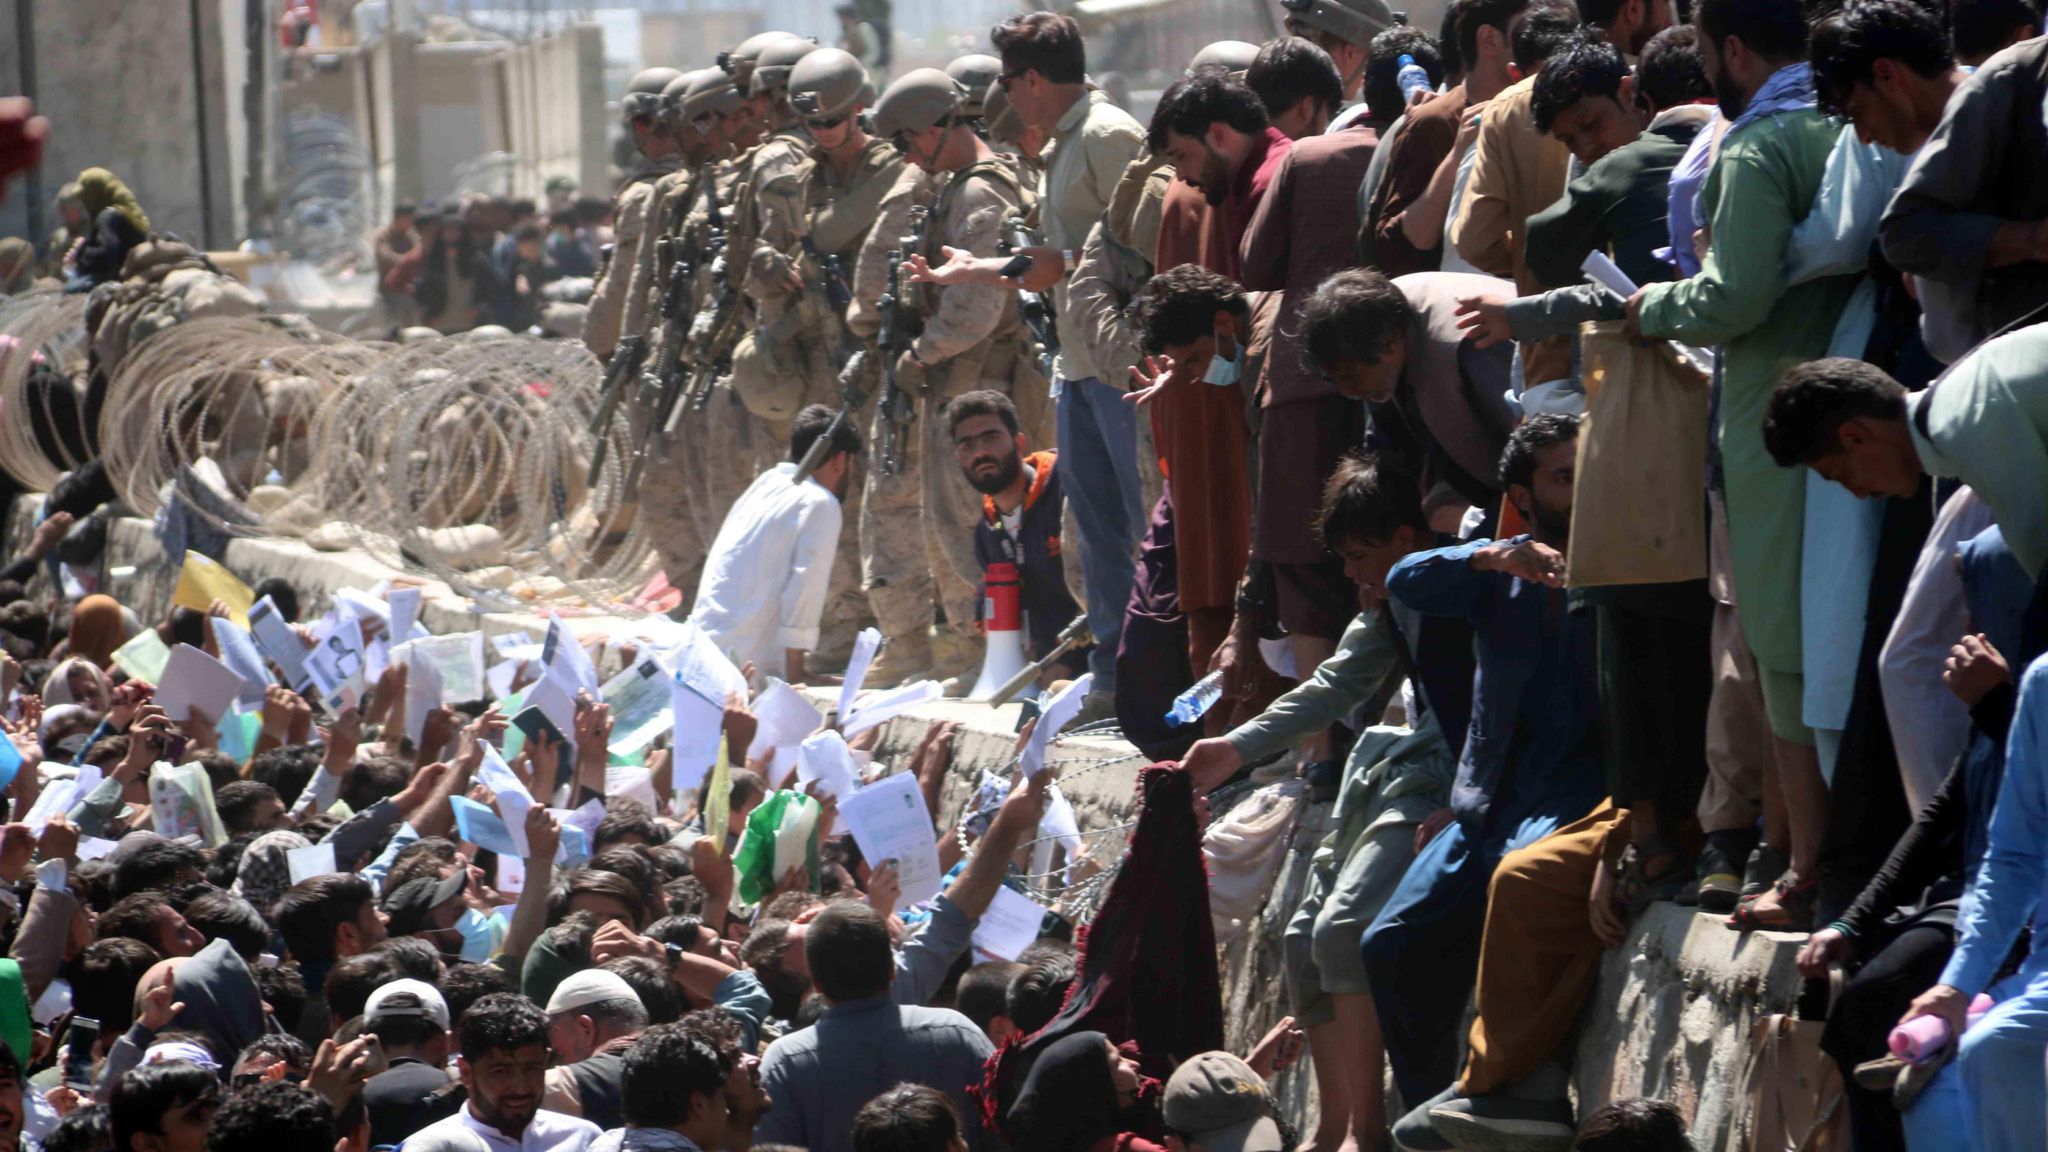 Afghans try to show their documents to soldiers outside Kabul airport